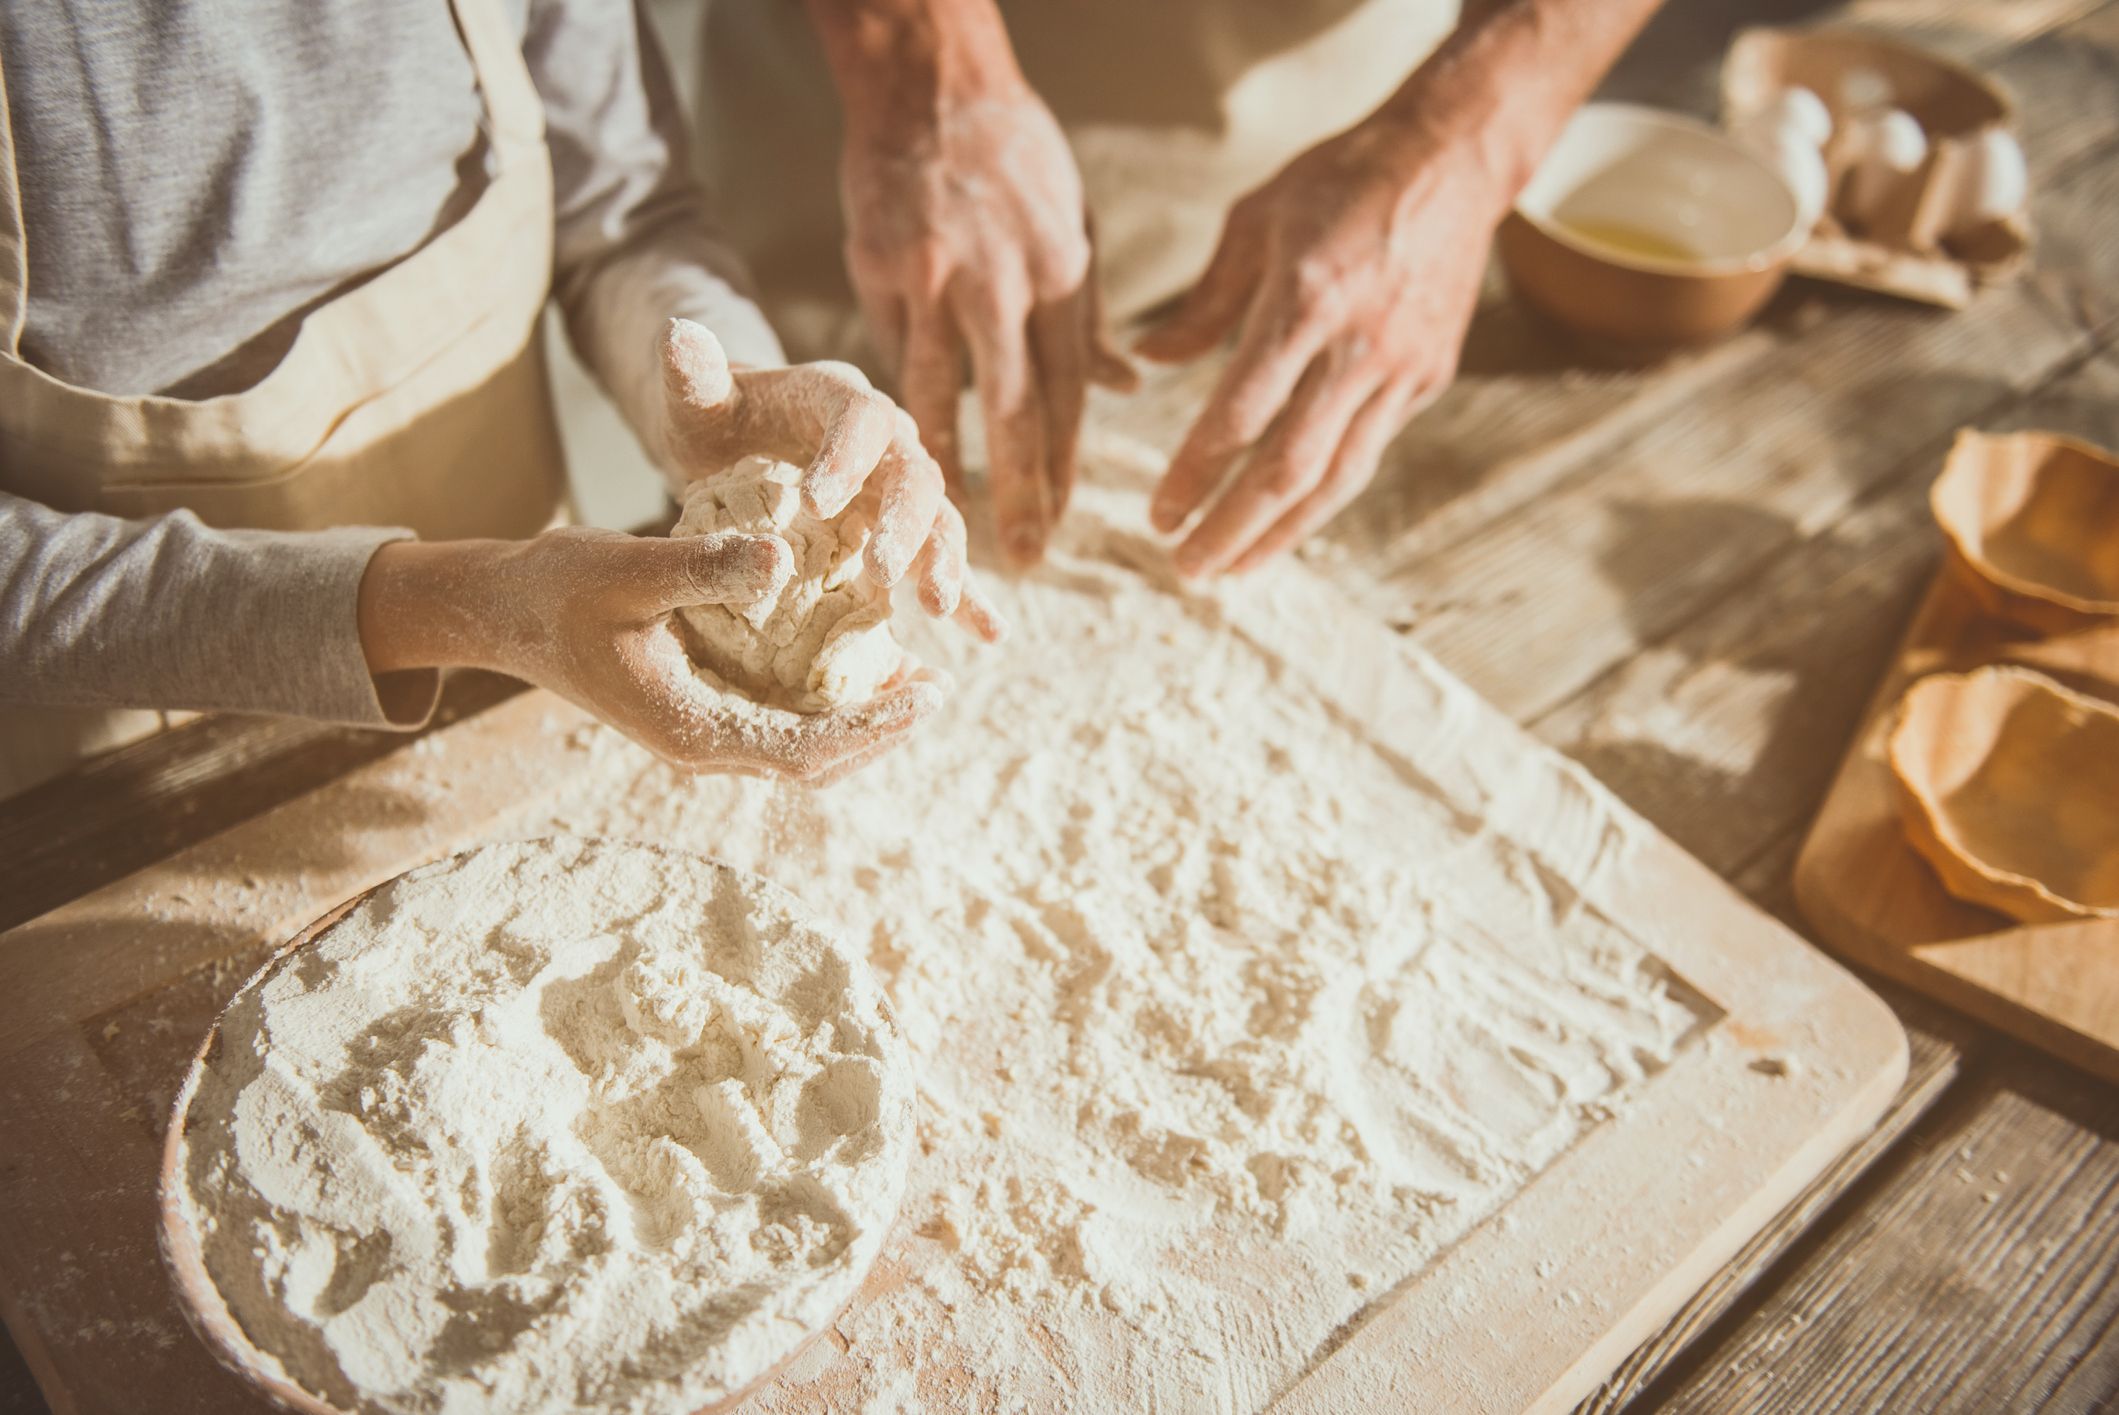 Kid forming pastry by hands